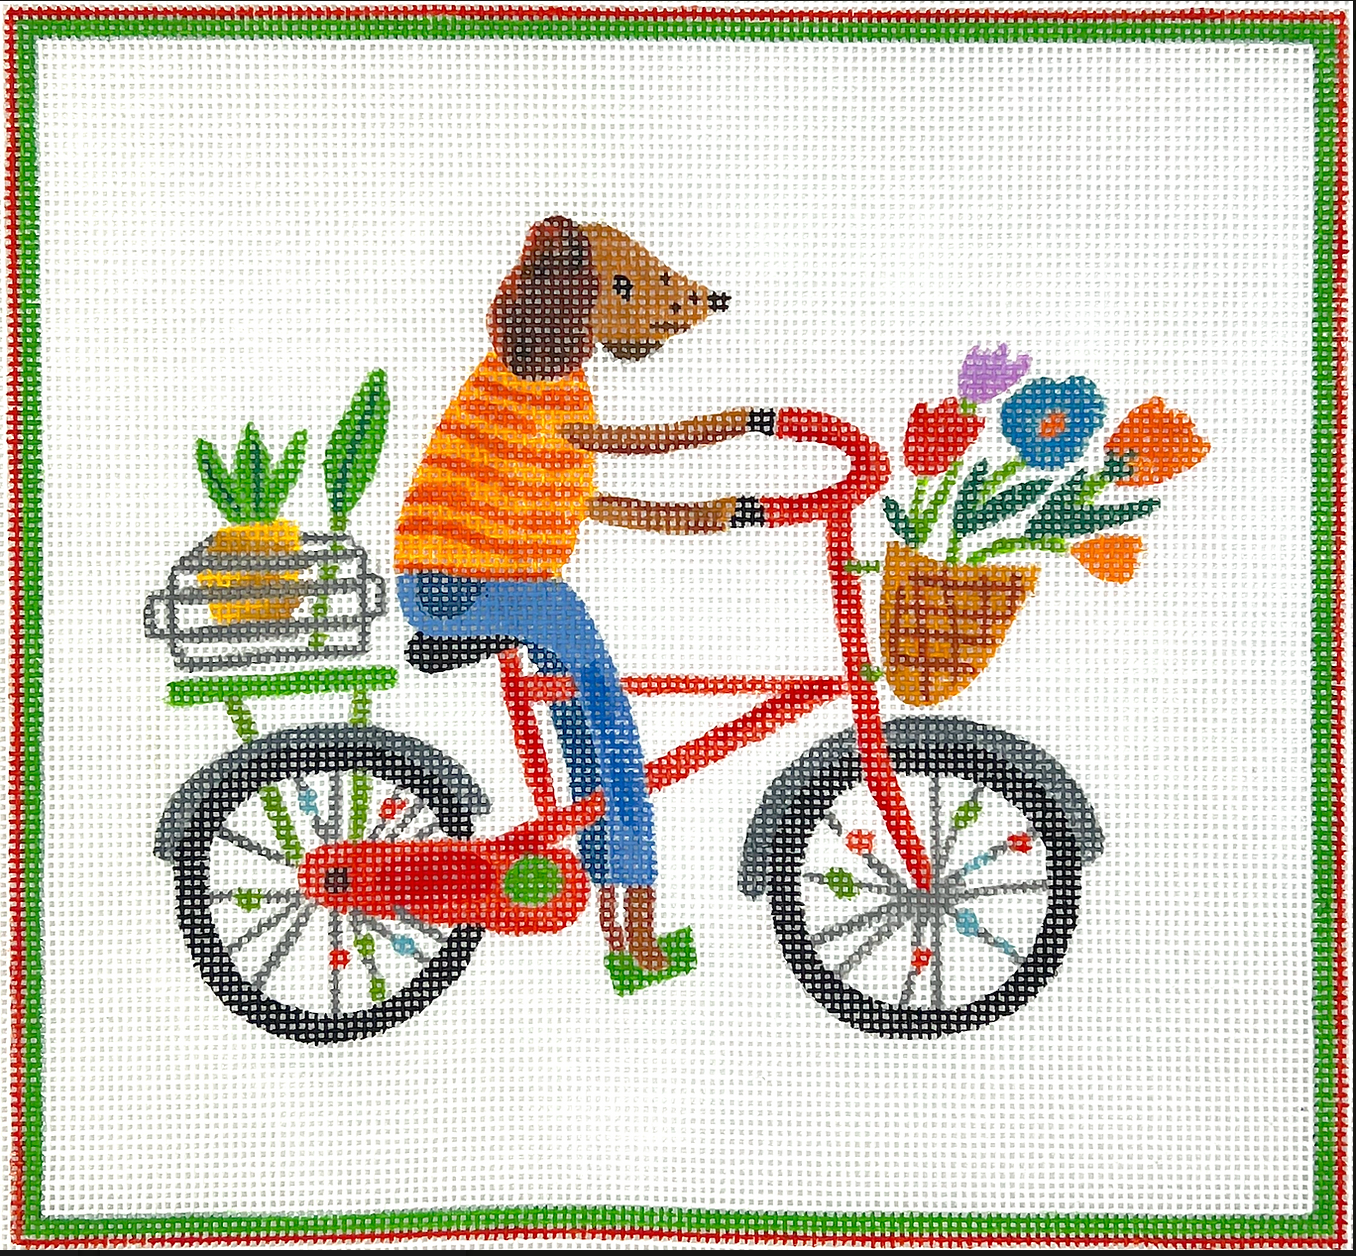 Kate Dickerson CG-PL-12 Carolyn Gavin Dog on Bicycle with Flowers and Pineapple